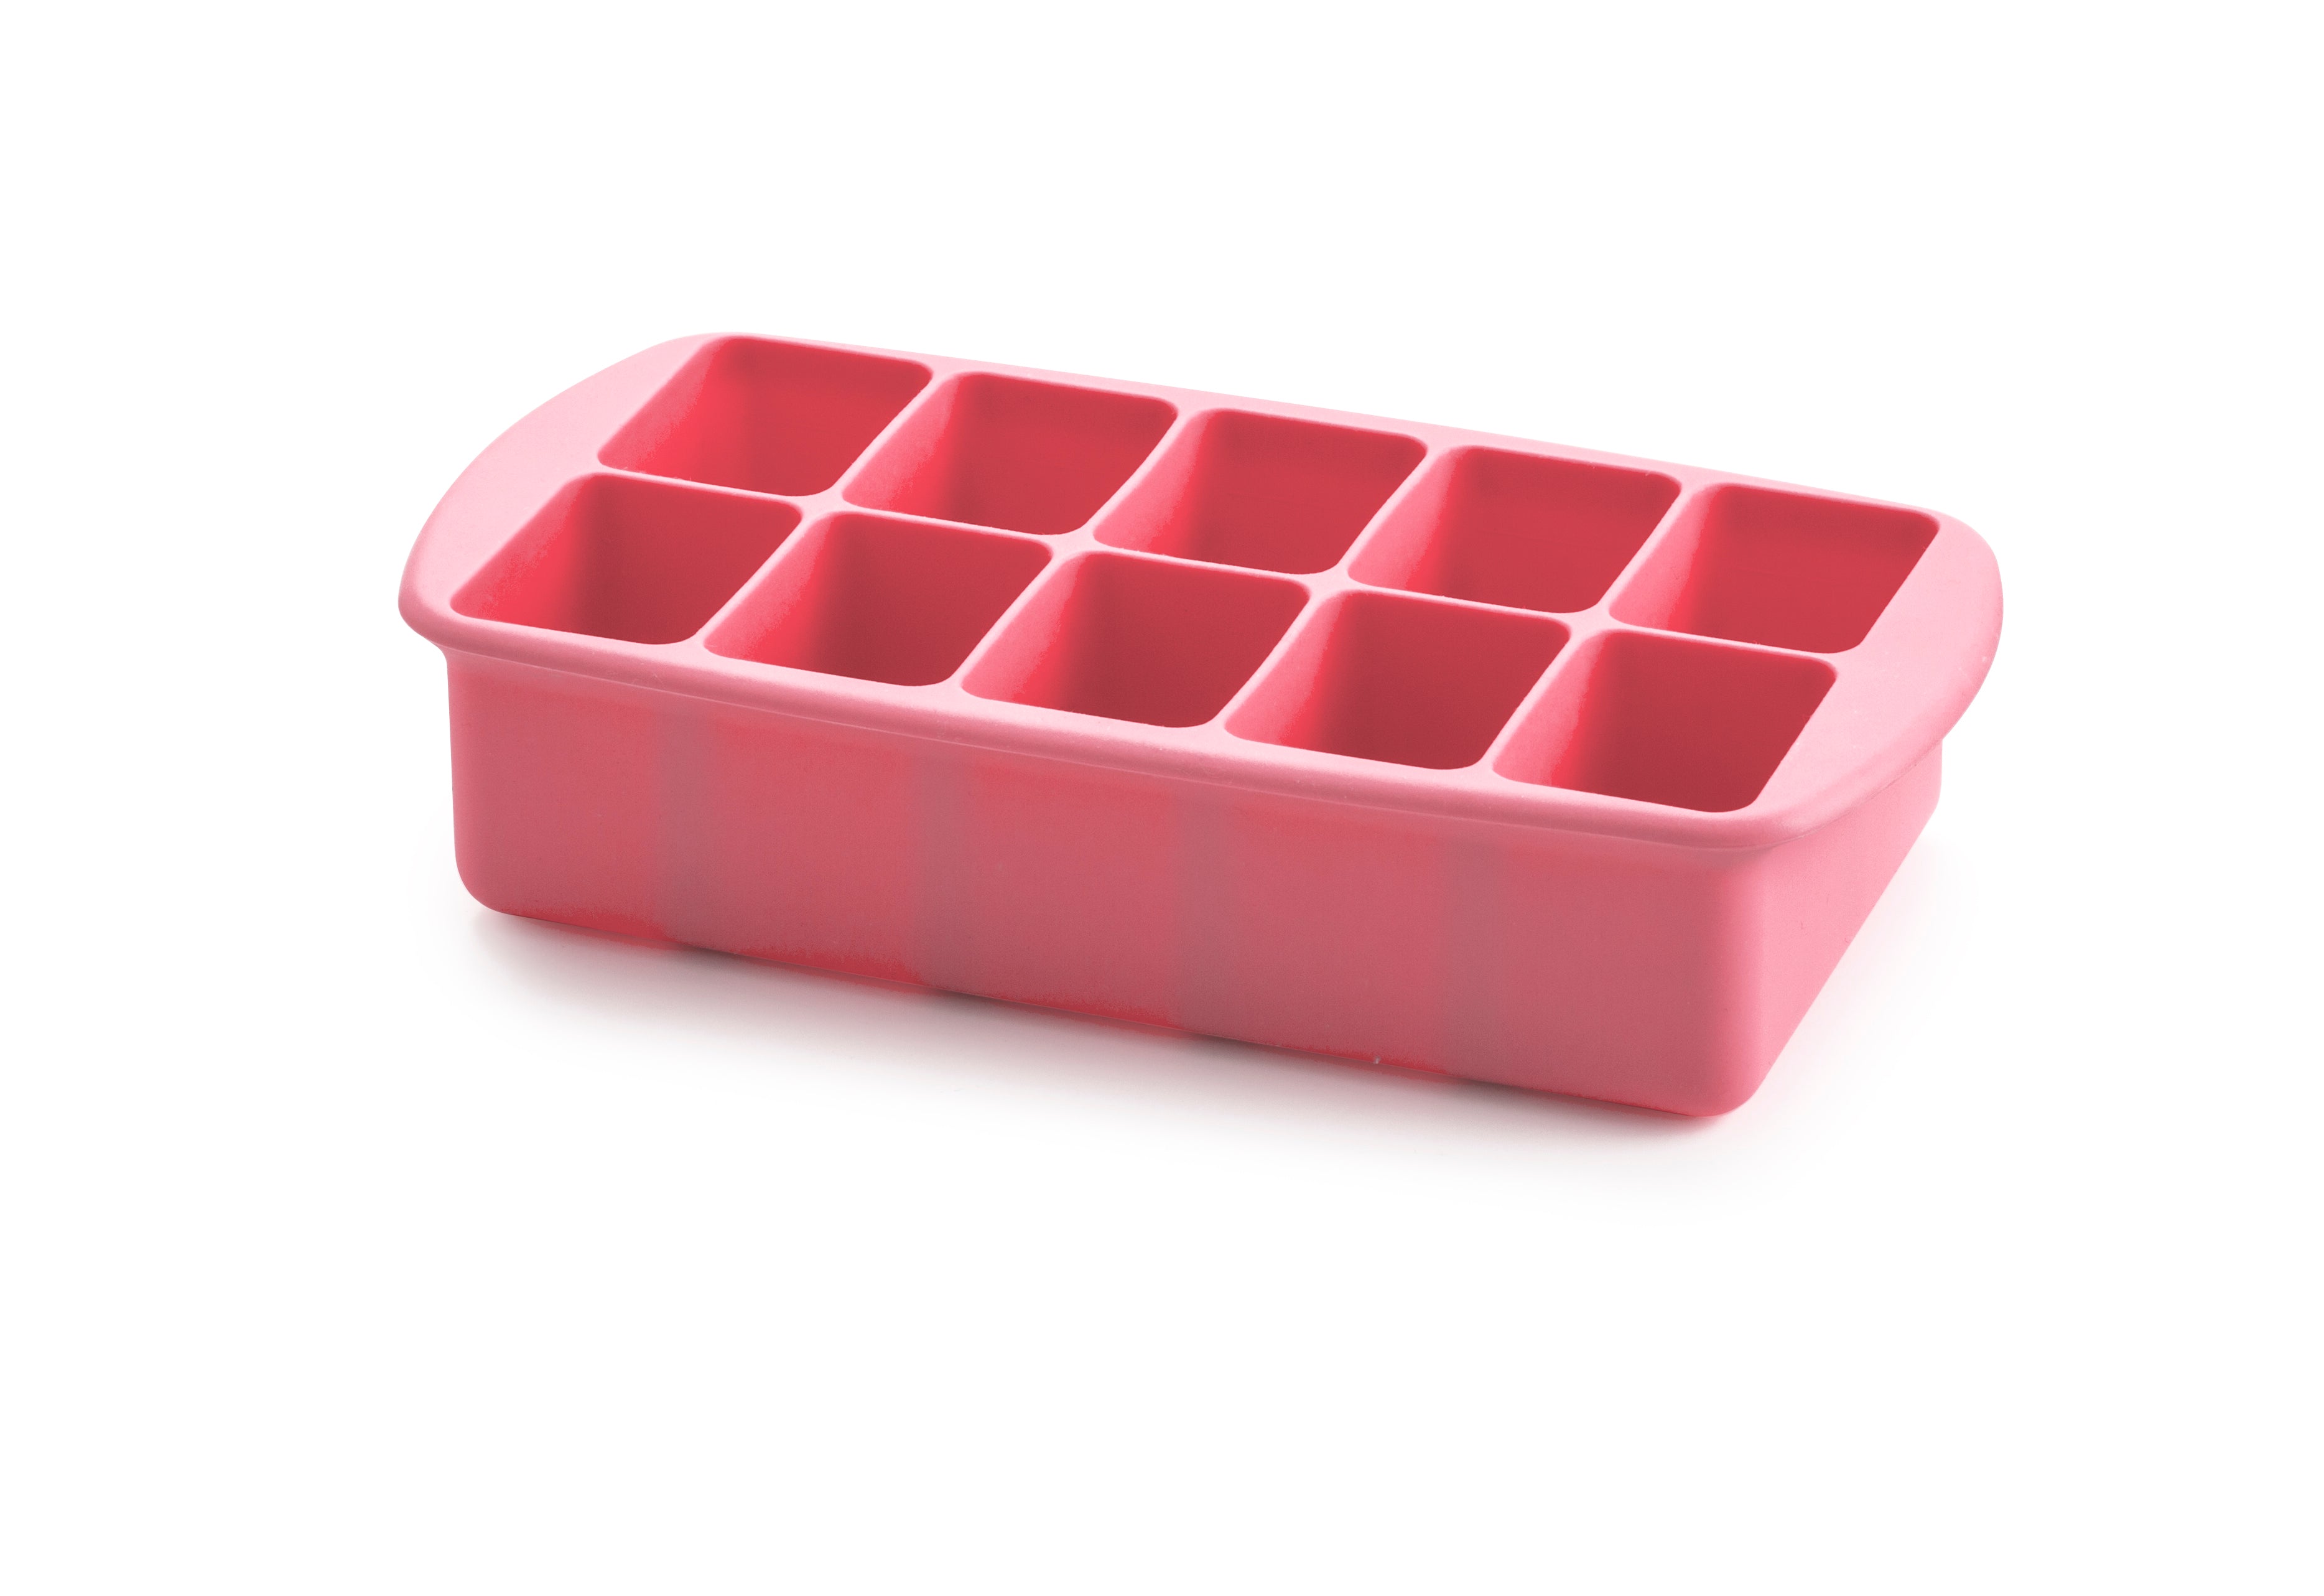  DIMRE Silicone Ice Tray Mold Storage Box Household Refrigerator  Ice Cream Mold Storage Ice Ball Ice Making Box with Lid WHYSFX (Size : A4)  : לבית ולמטבח